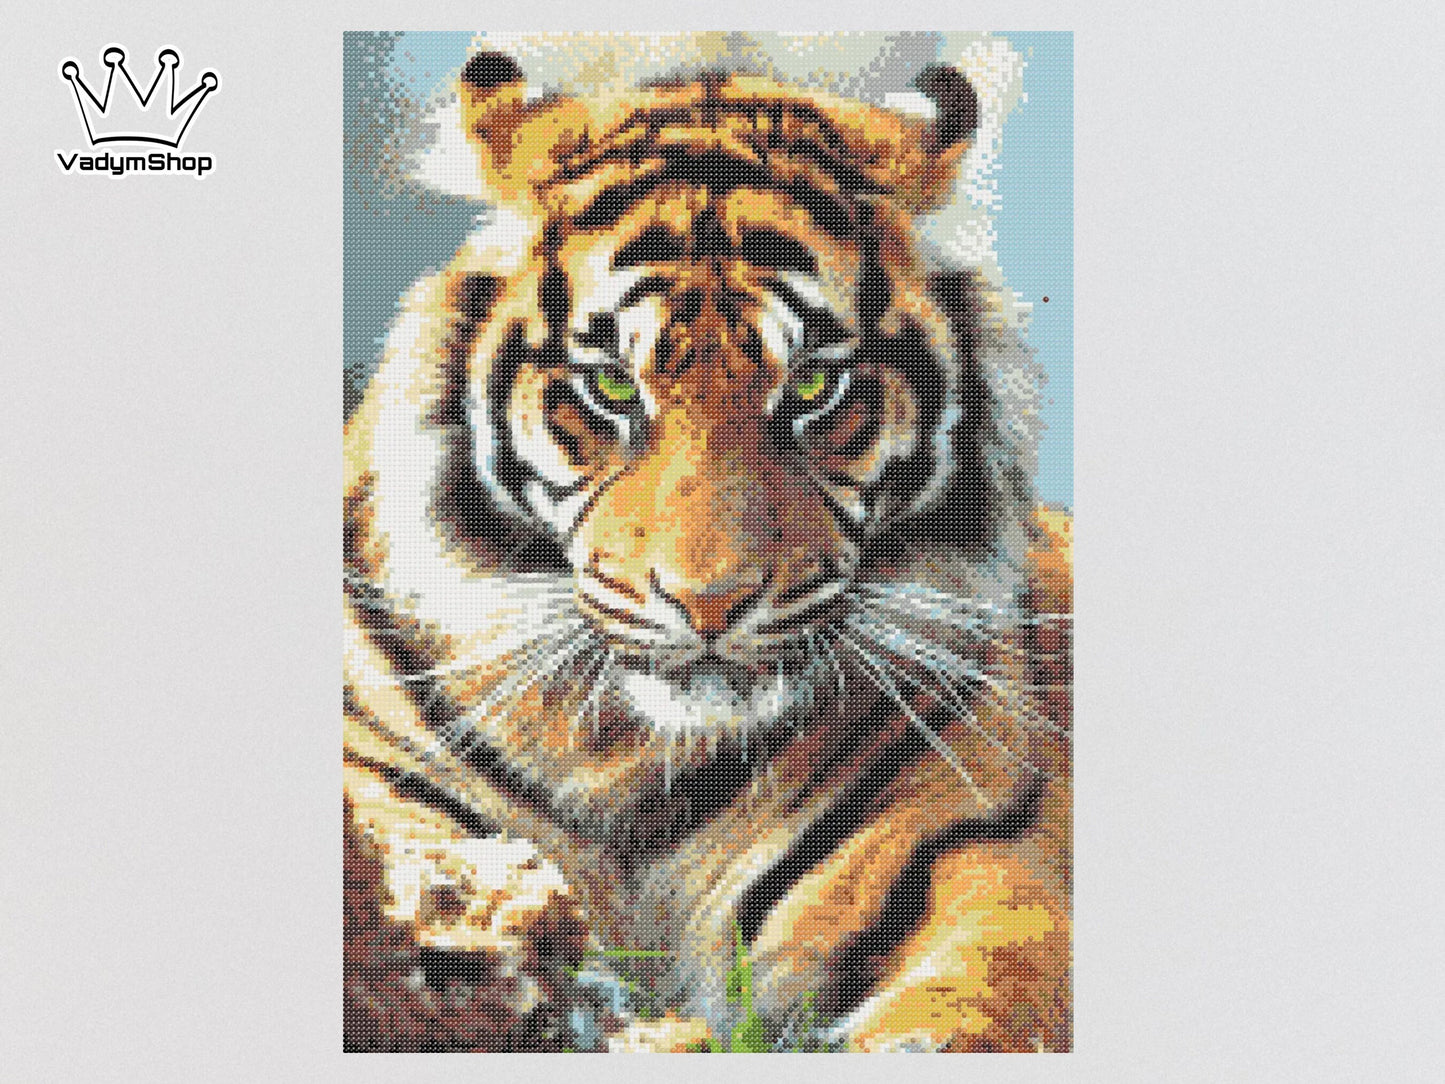 Bead embroidery kit "Tiger". - VadymShop